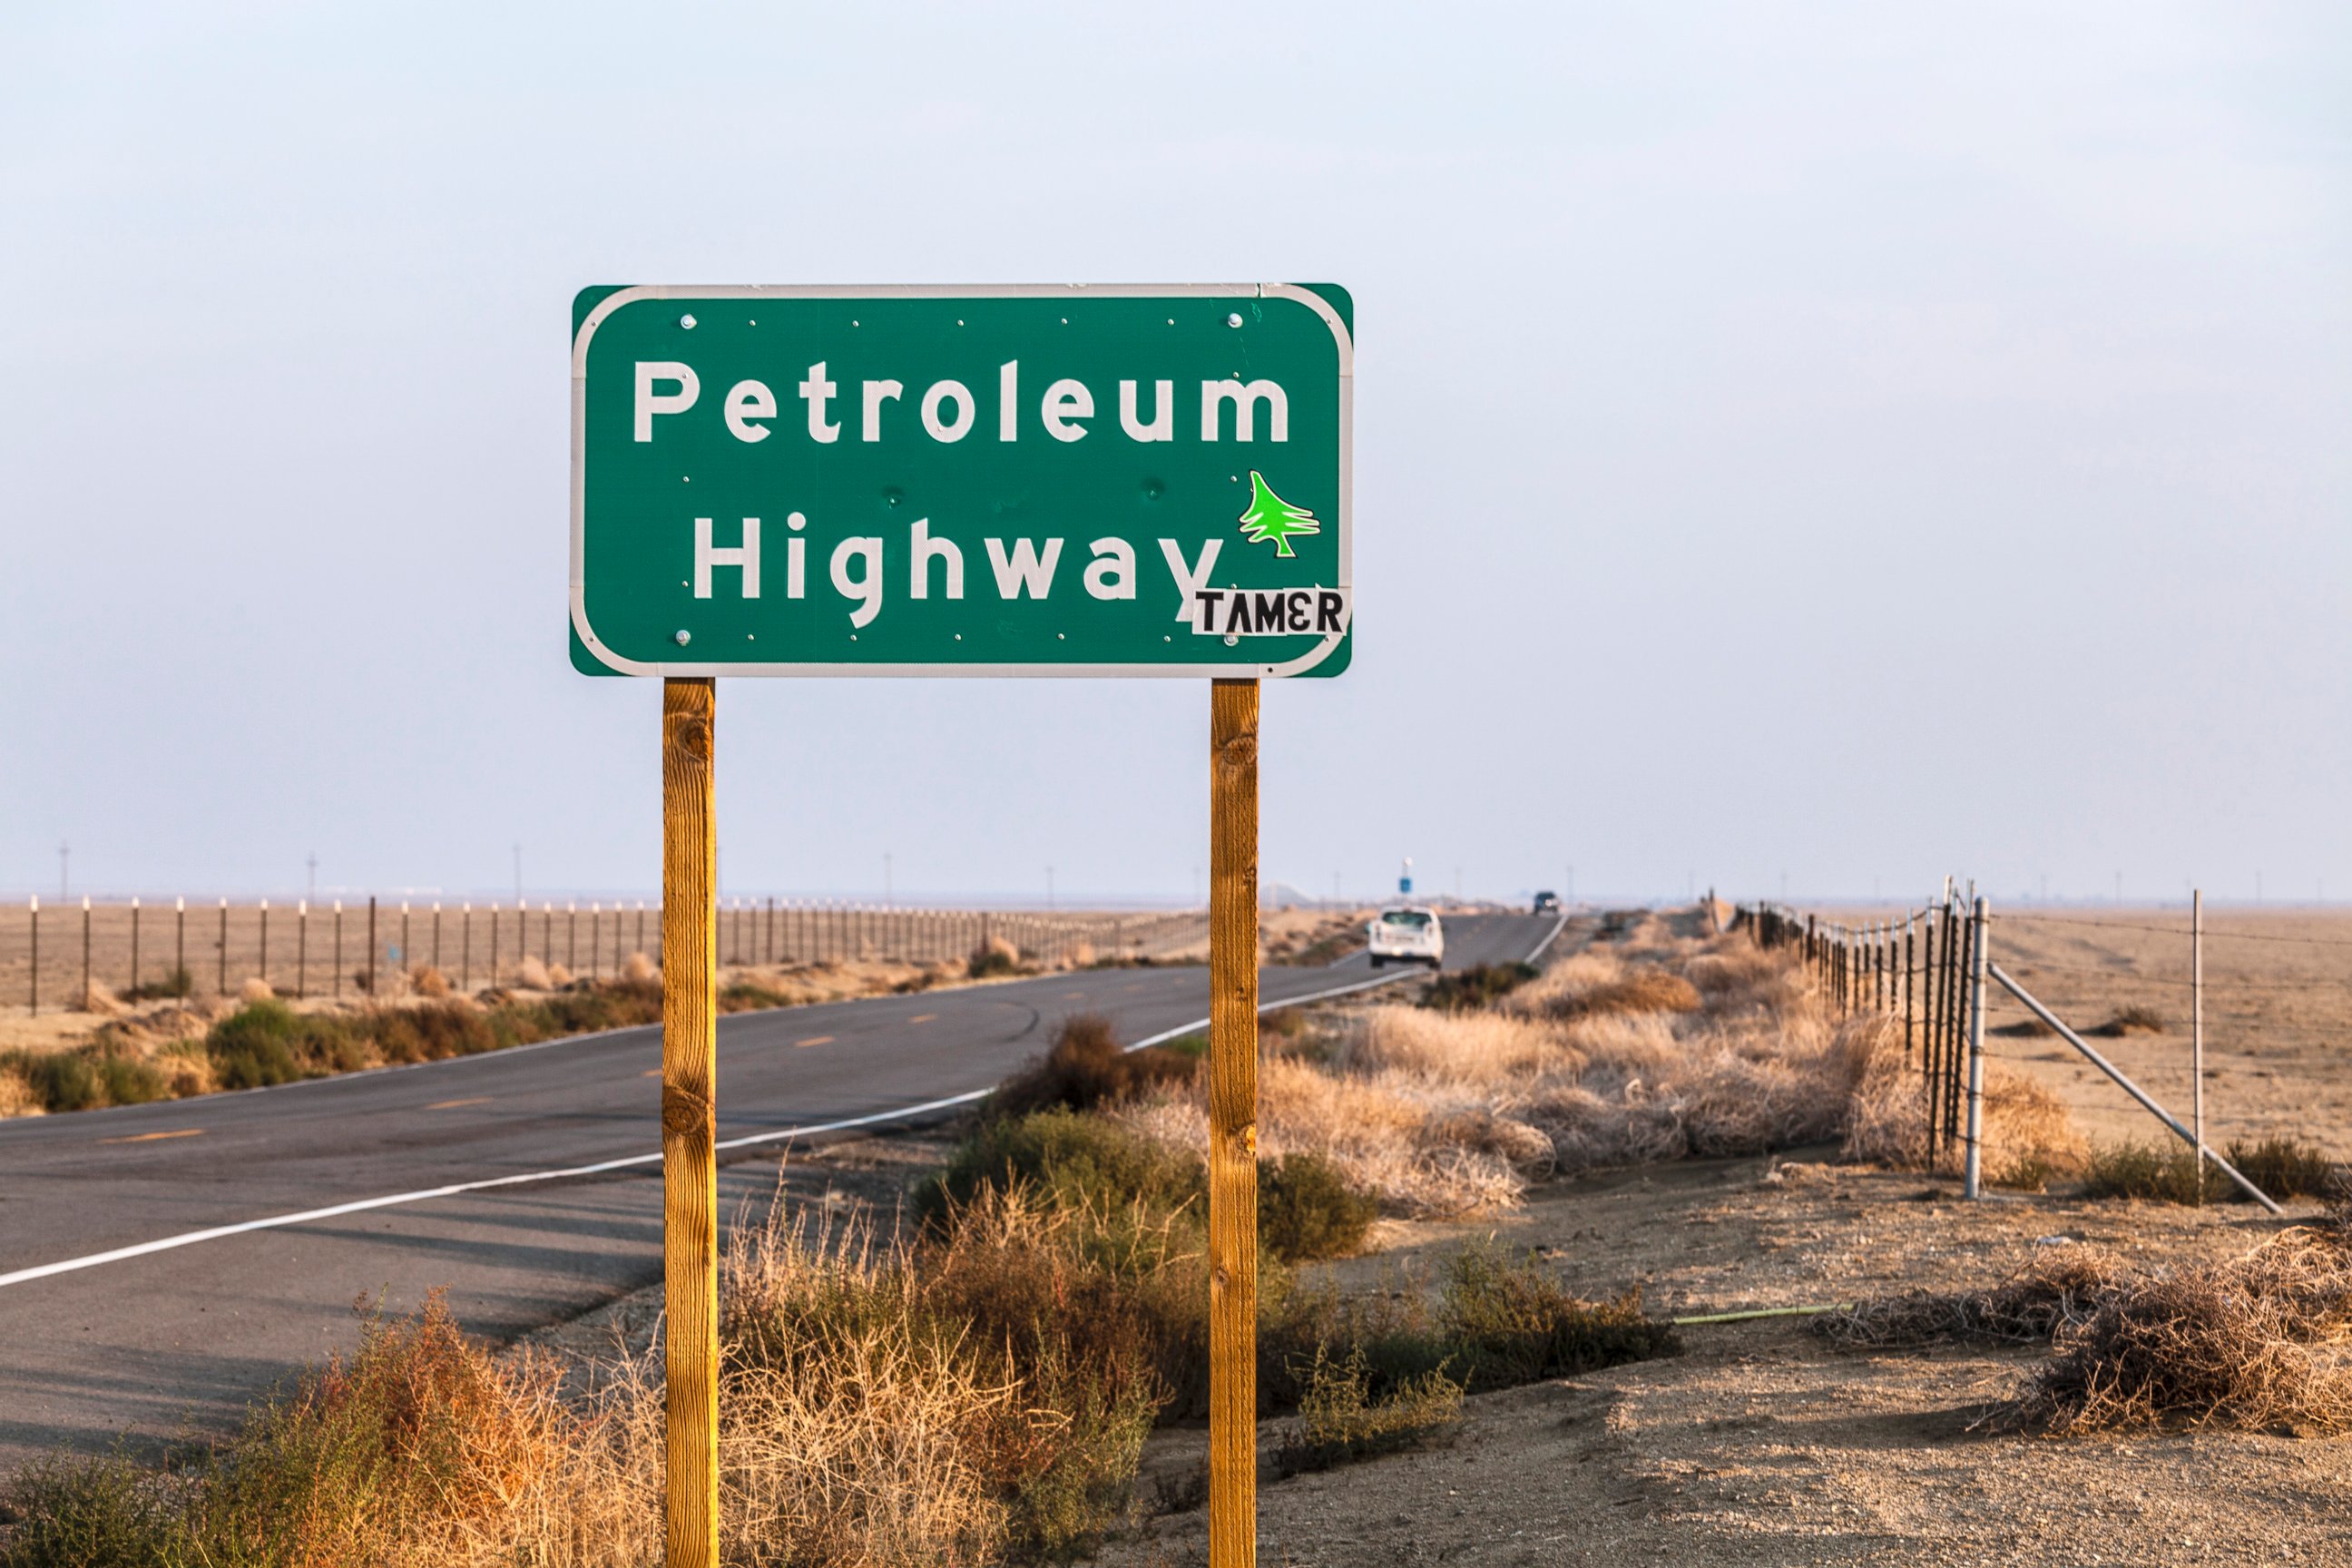 PHOTO: The Petroleum Highway in the San Joaquin Valley, California.